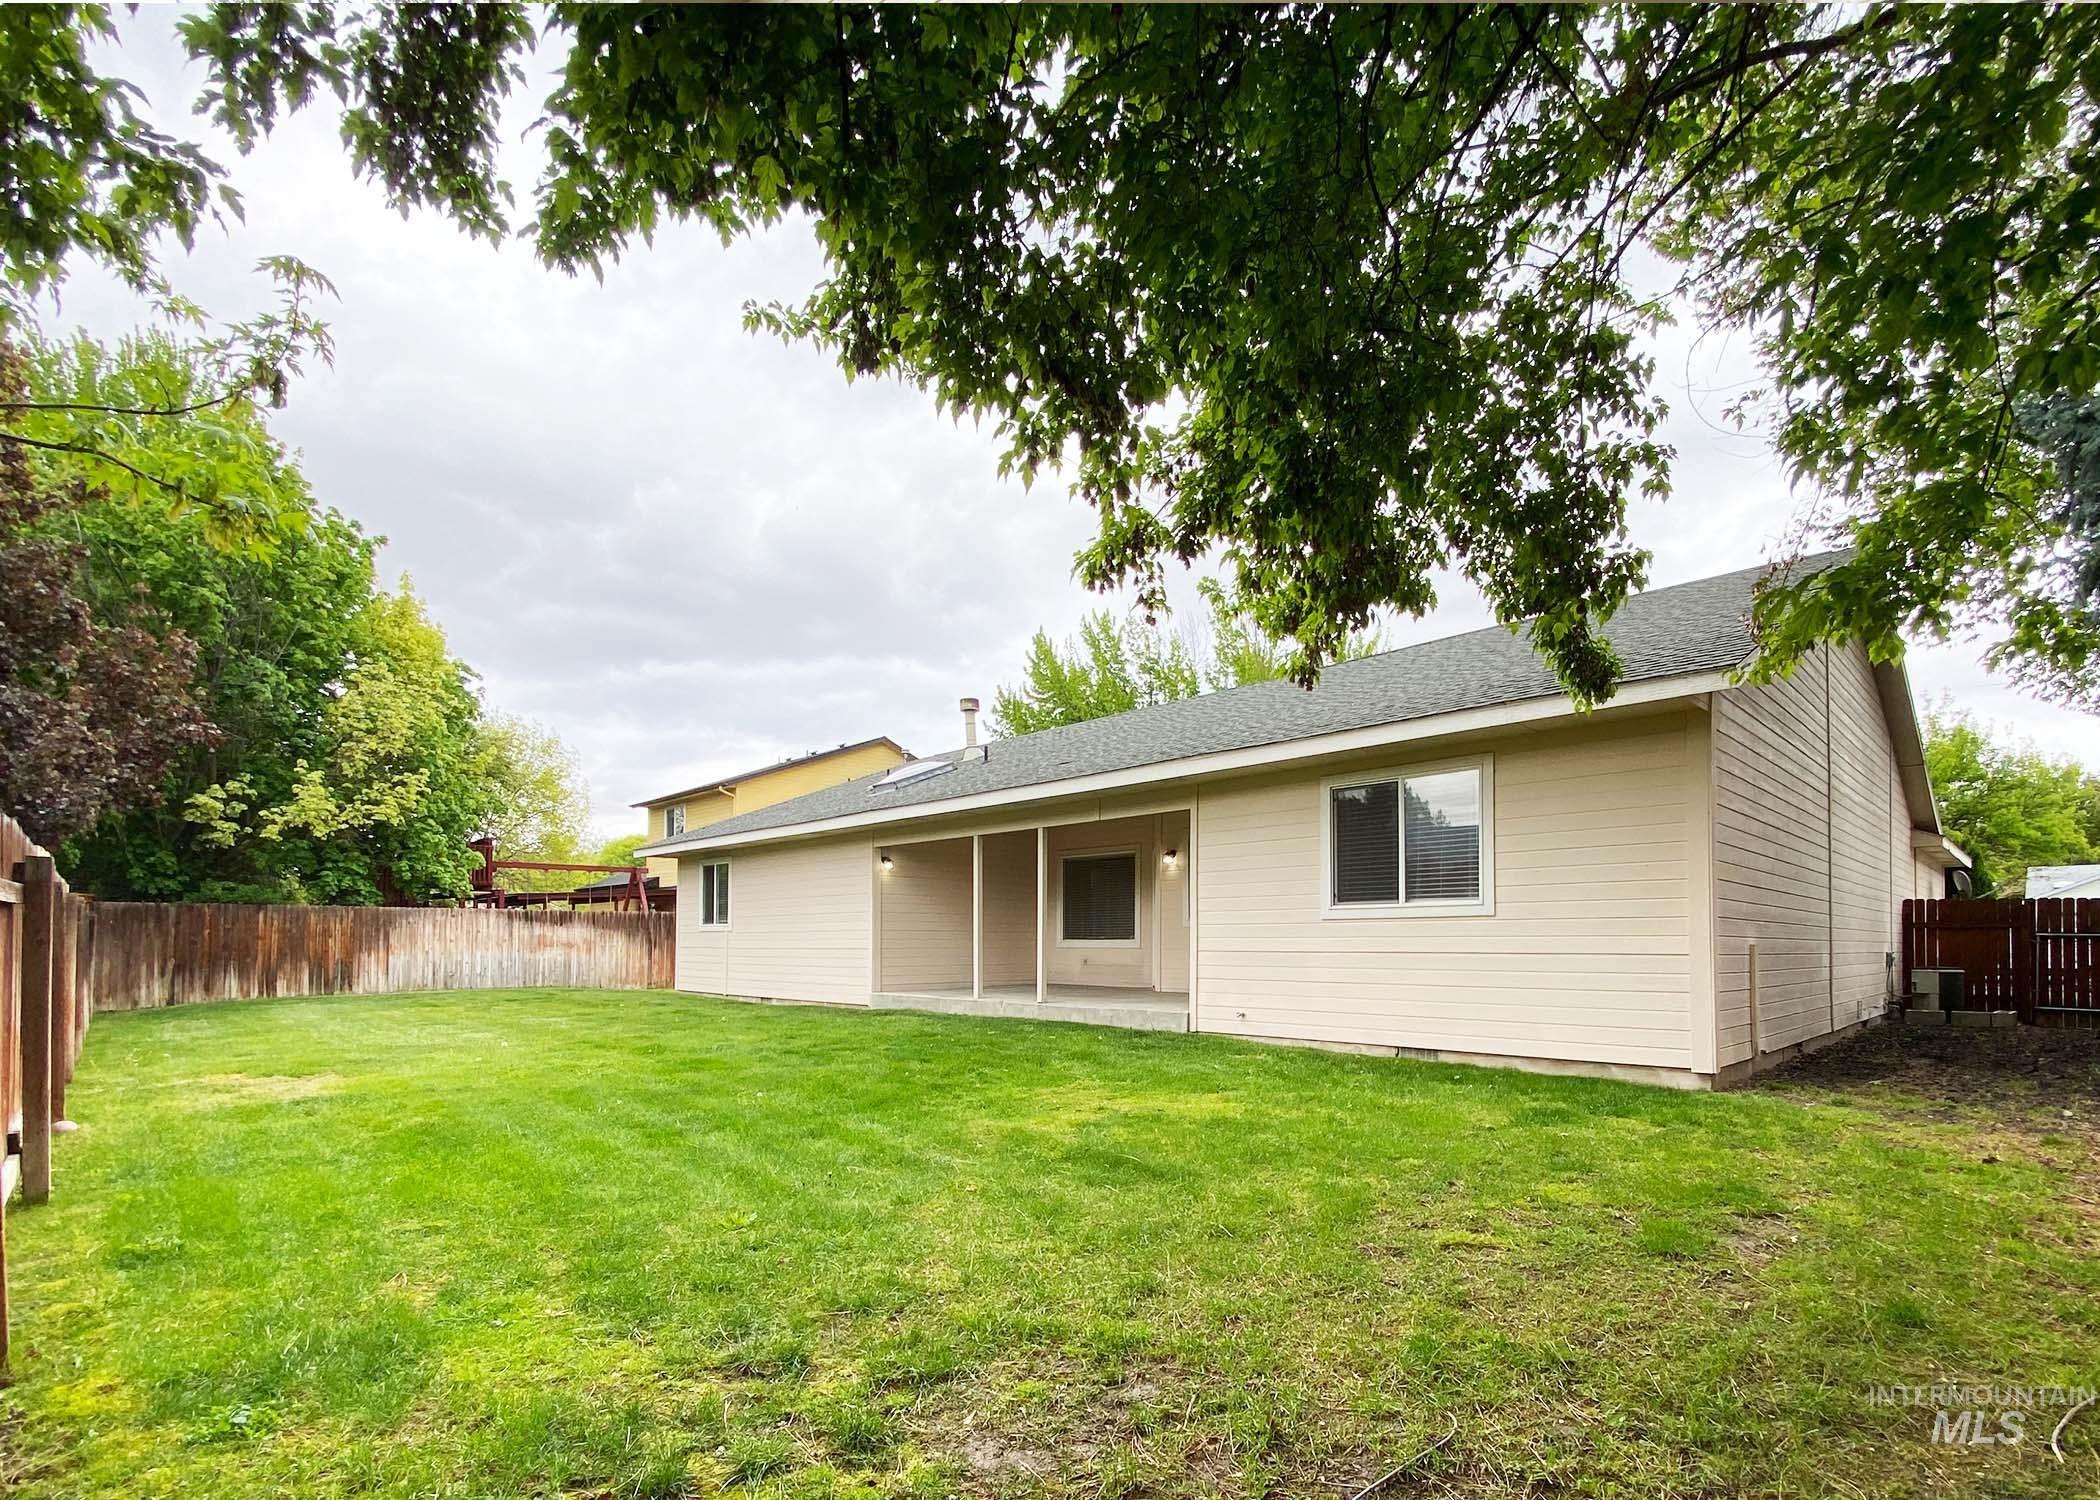 67 S Firwood Ave., Eagle, Idaho 83616, 4 Bedrooms, 2 Bathrooms, Residential For Sale, Price $610,000,MLS 98909480